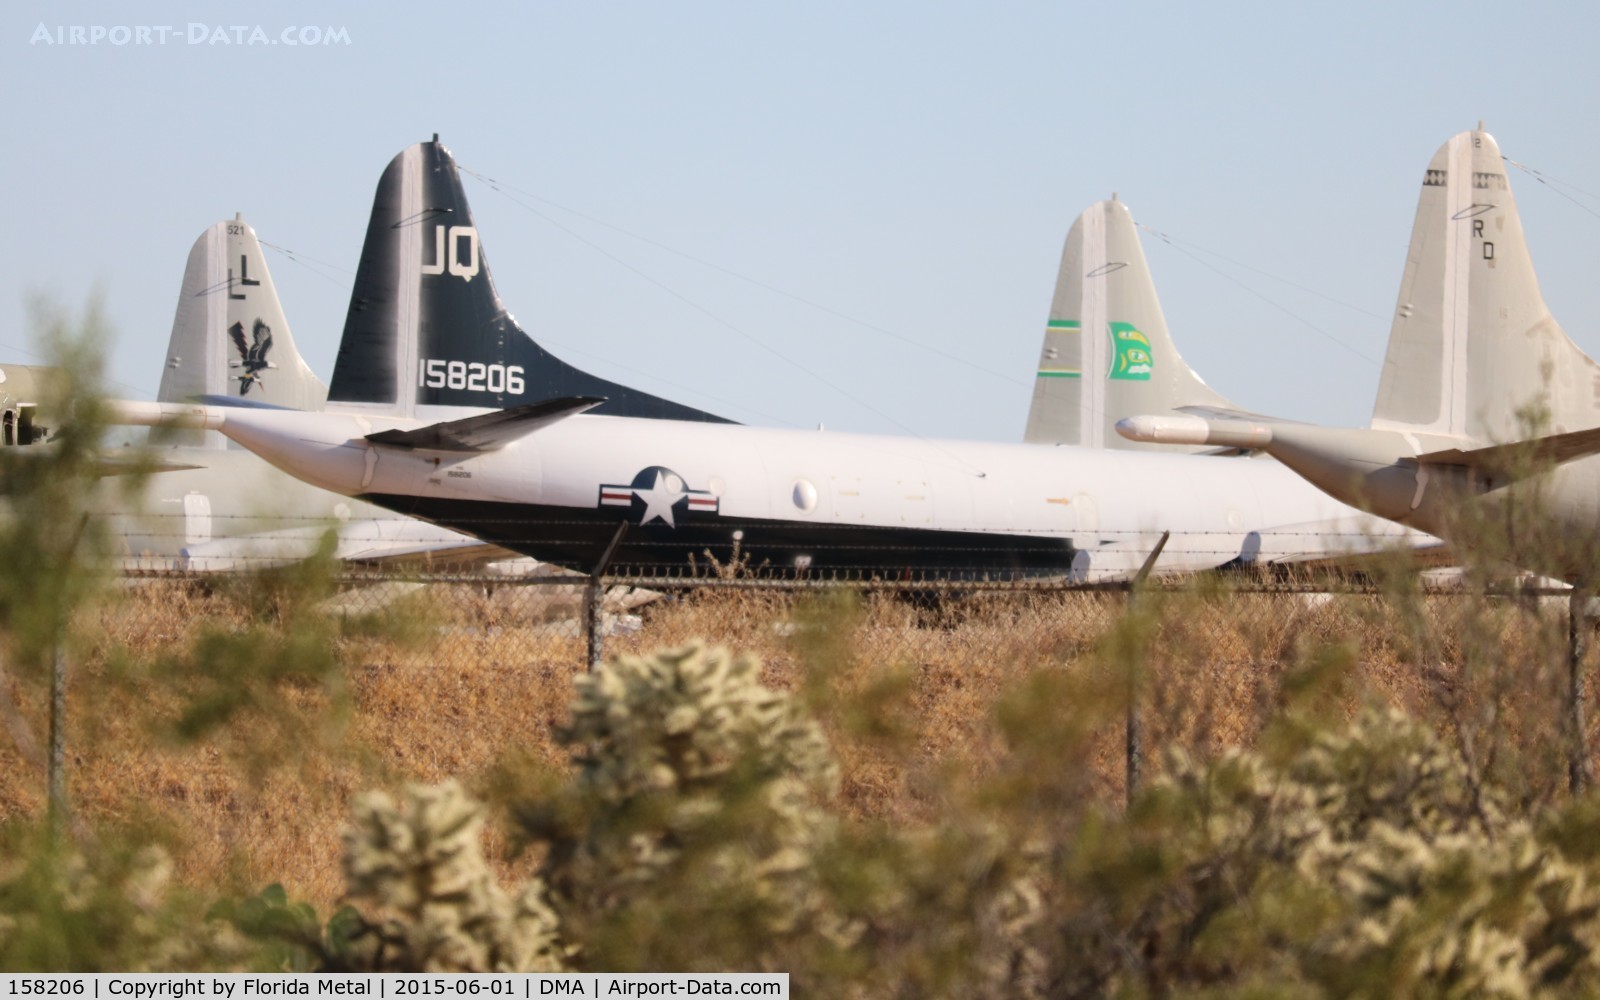 158206, 1971 Lockheed P-3C Orion C/N 285A-5550, P-3C Orion